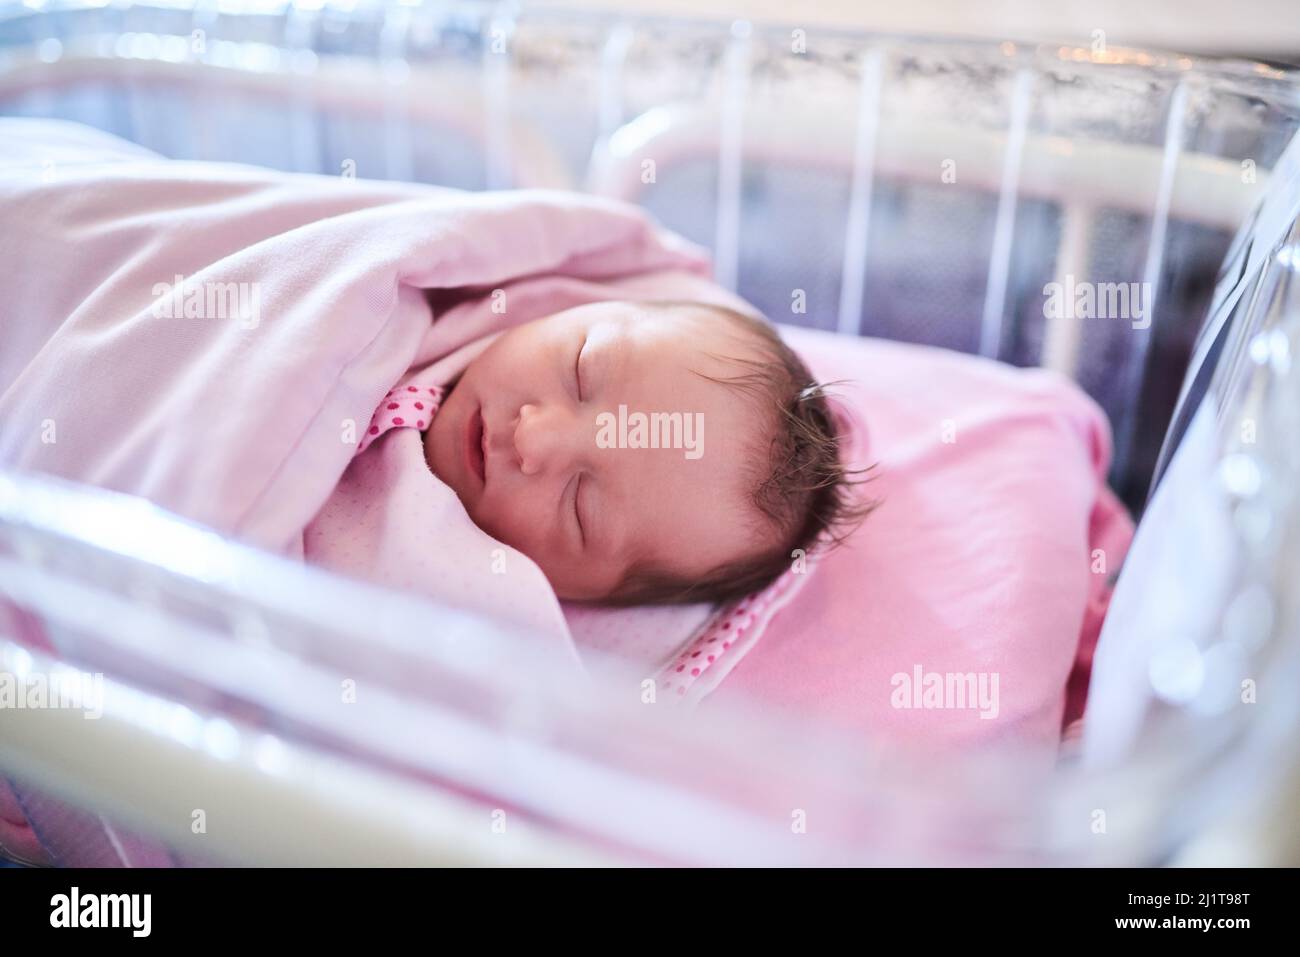 We hope all her dreams come true. Shot of a newly born baby girl wrapped in a blanket in the hospital. Stock Photo